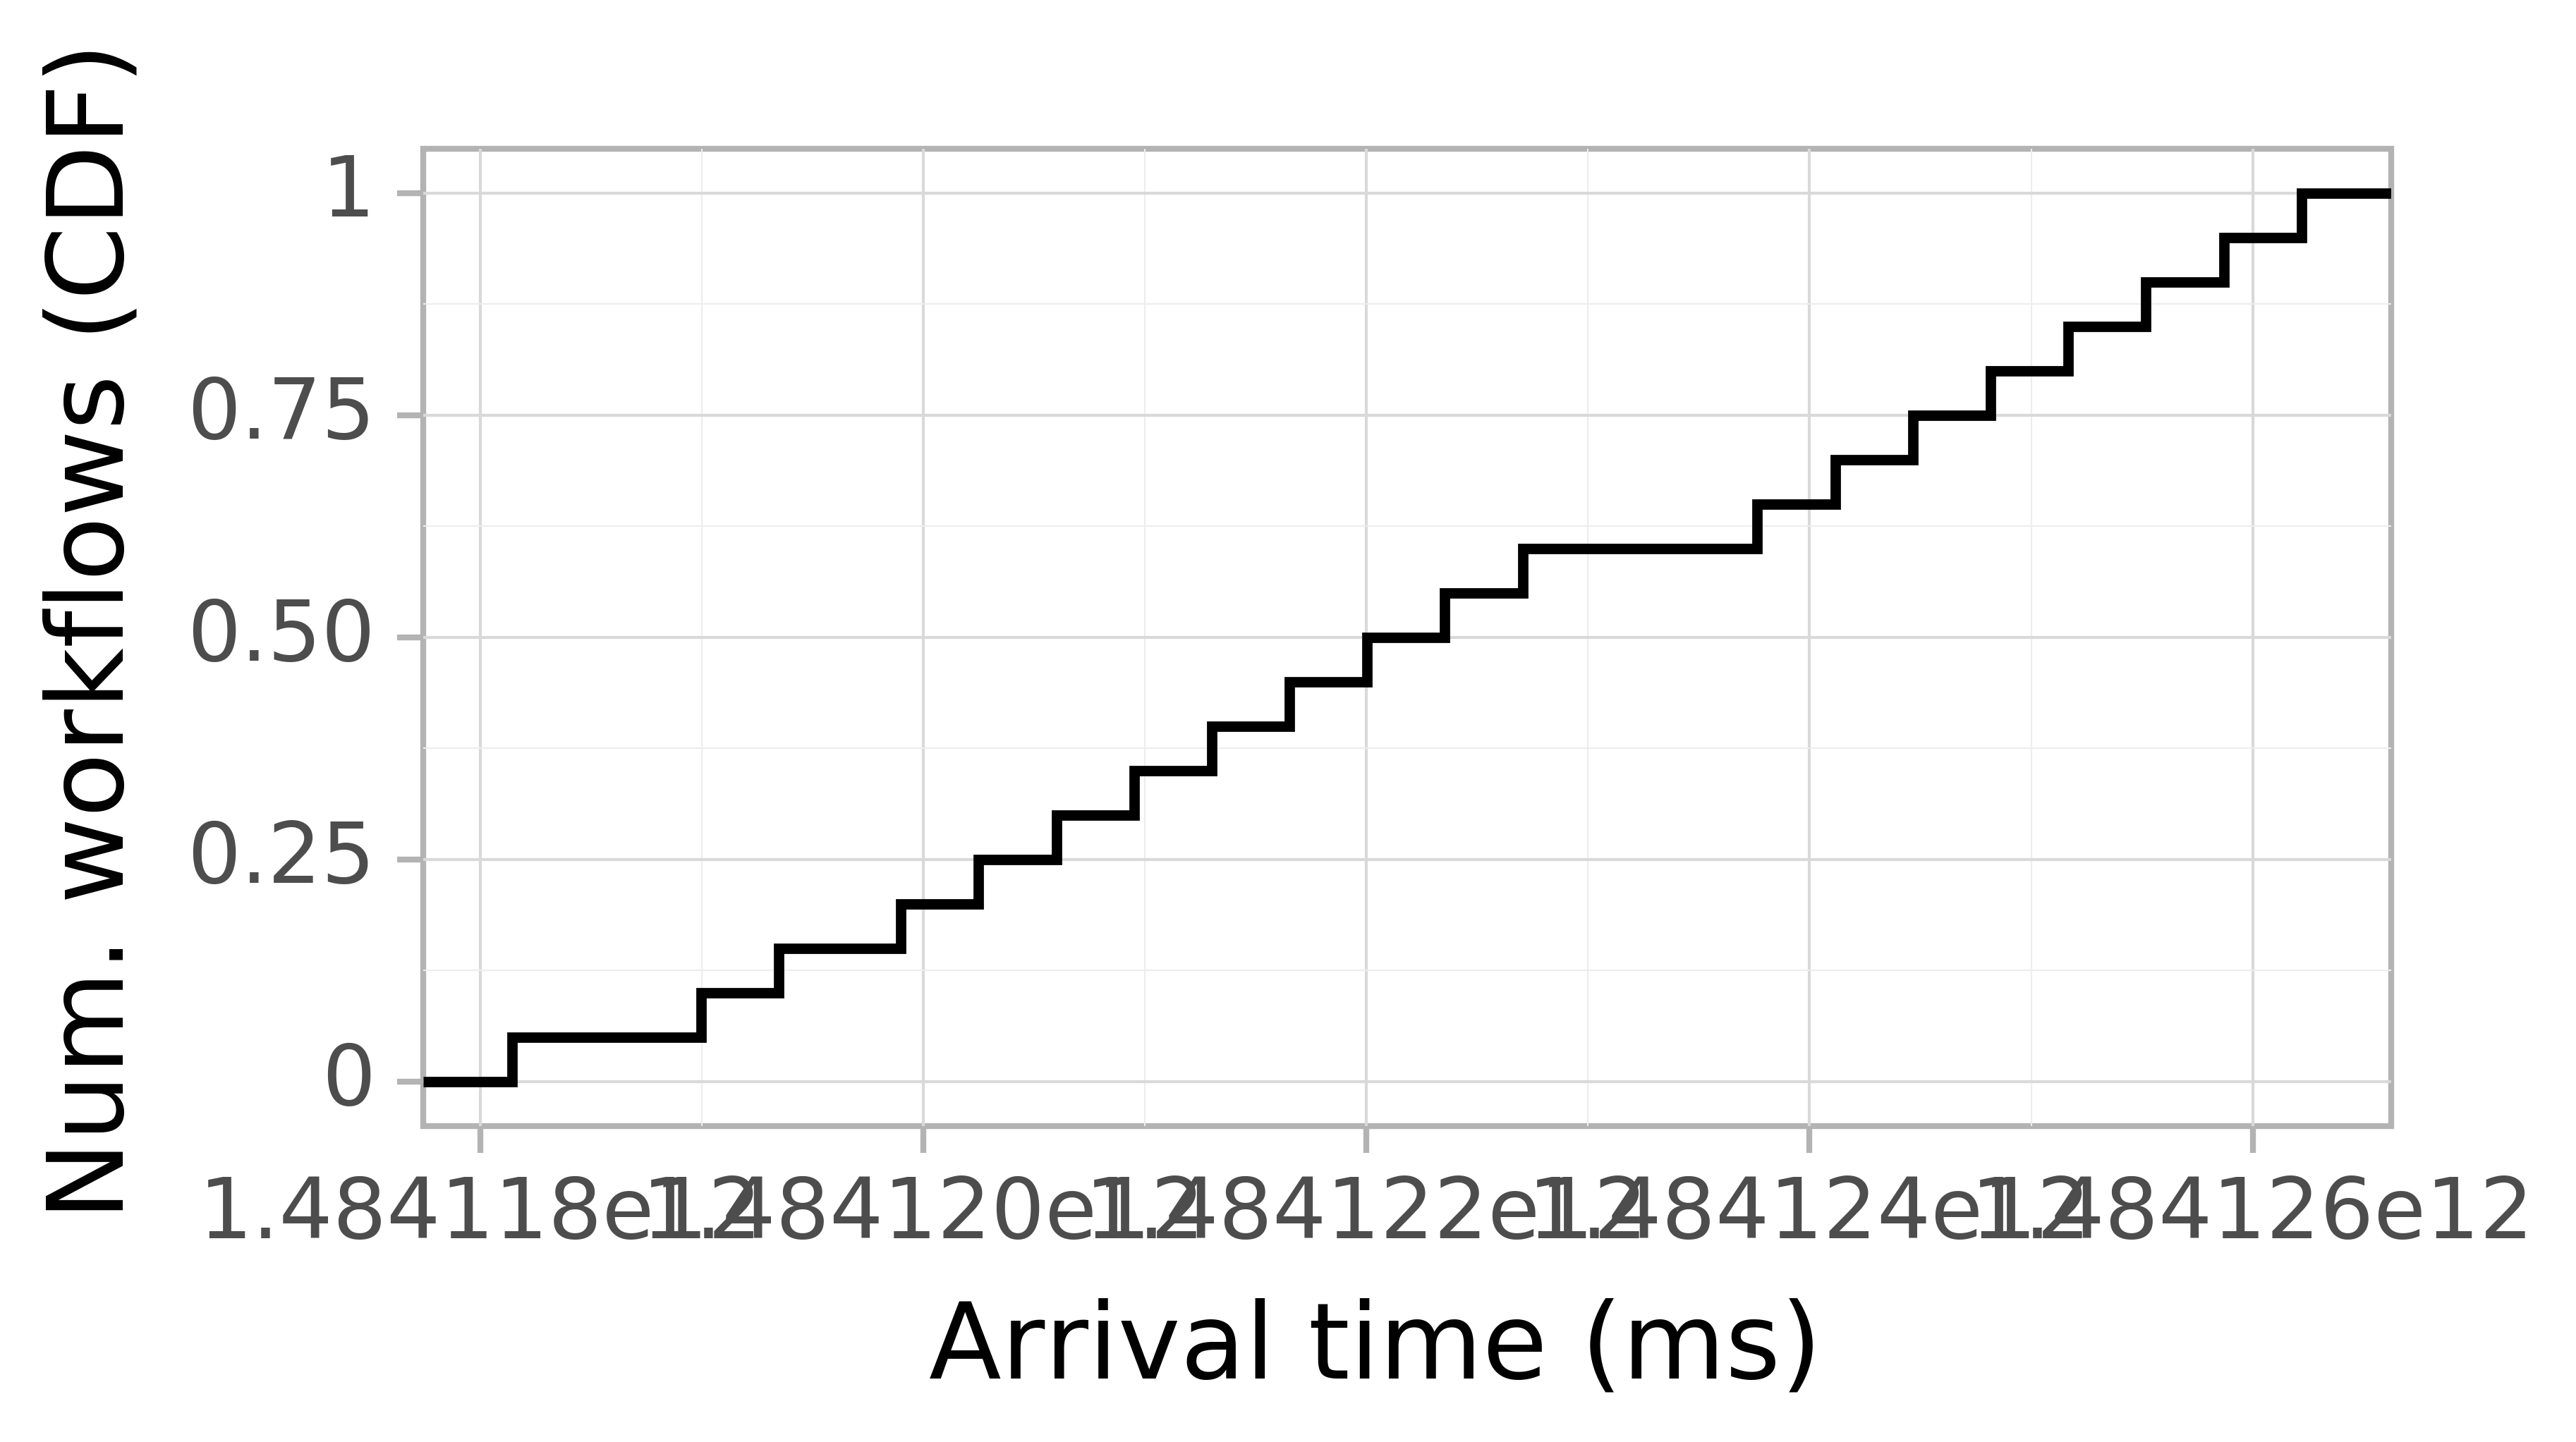 Job arrival CDF graph for the askalon-new_ee20 trace.